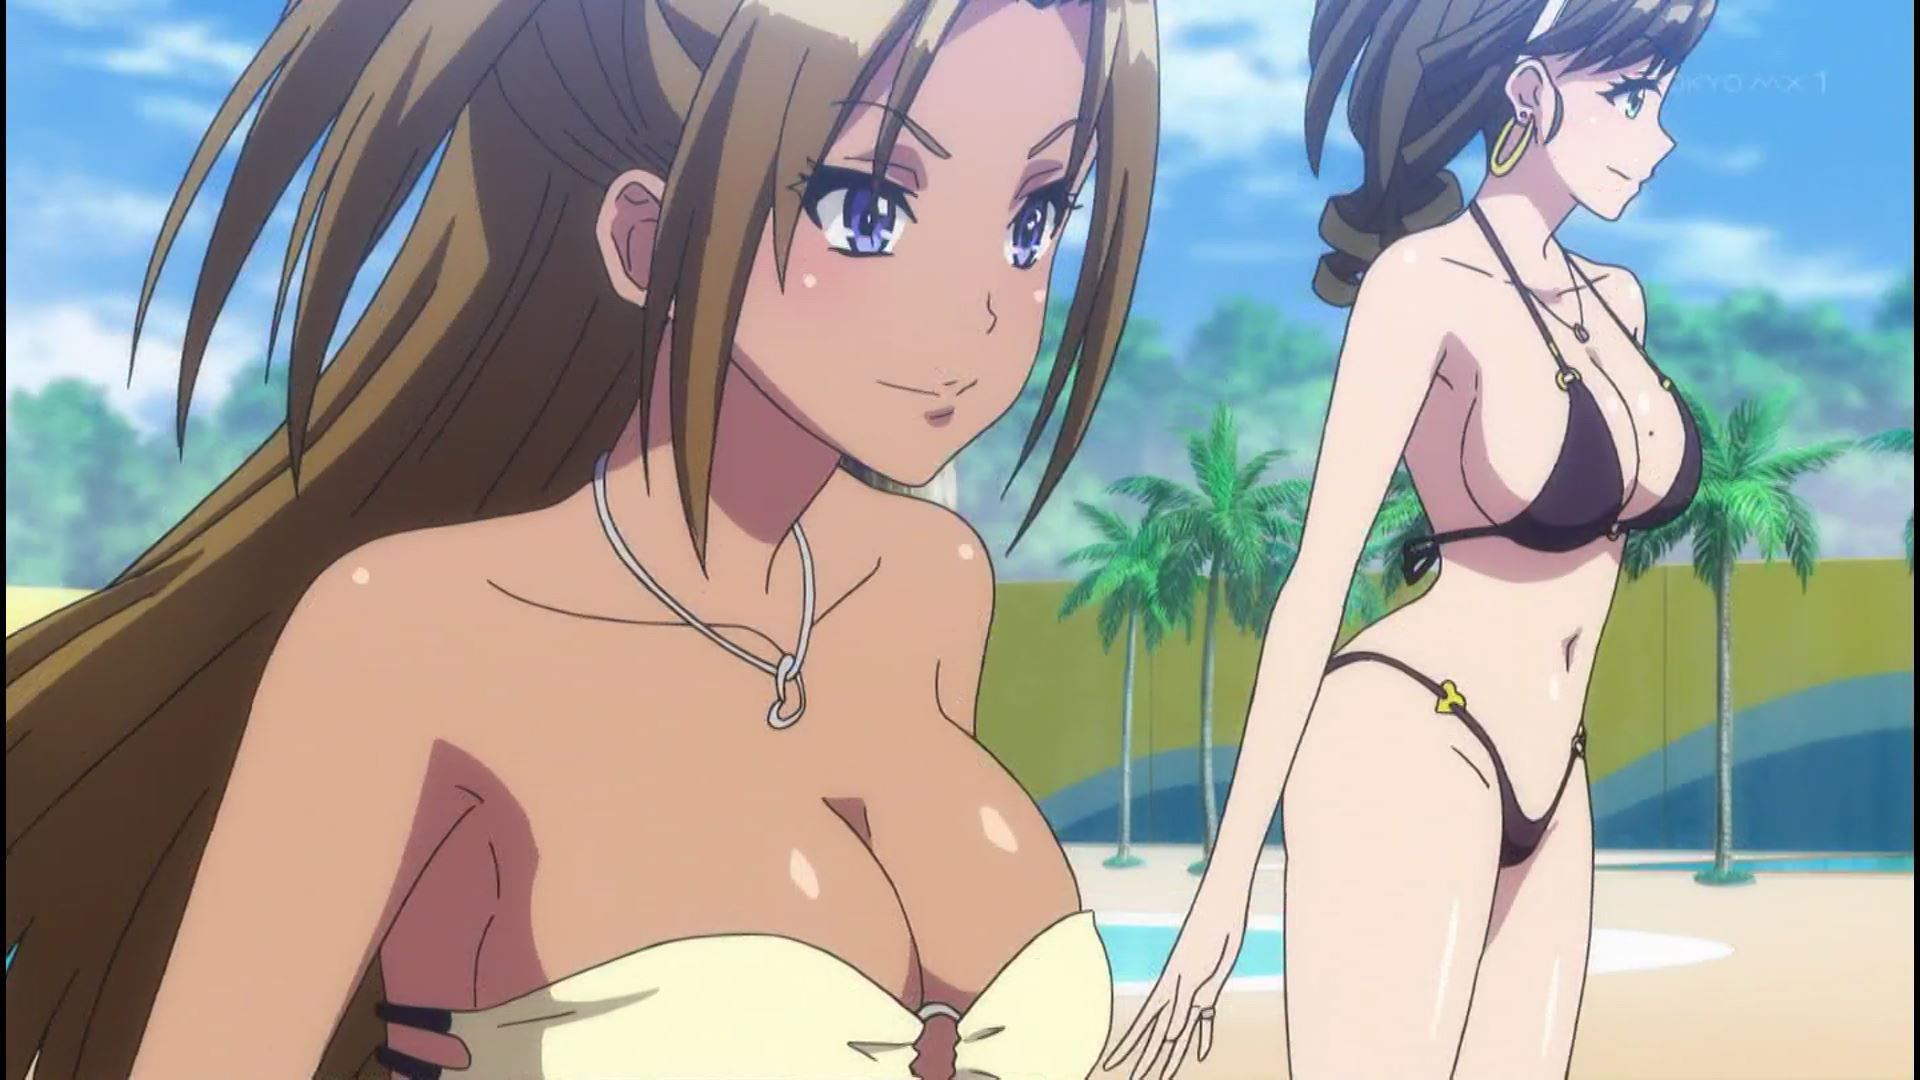 Anime [Kandagawa JETGIRLS] 6 episodes, such as girls' very cute swimsuit and naked! 15